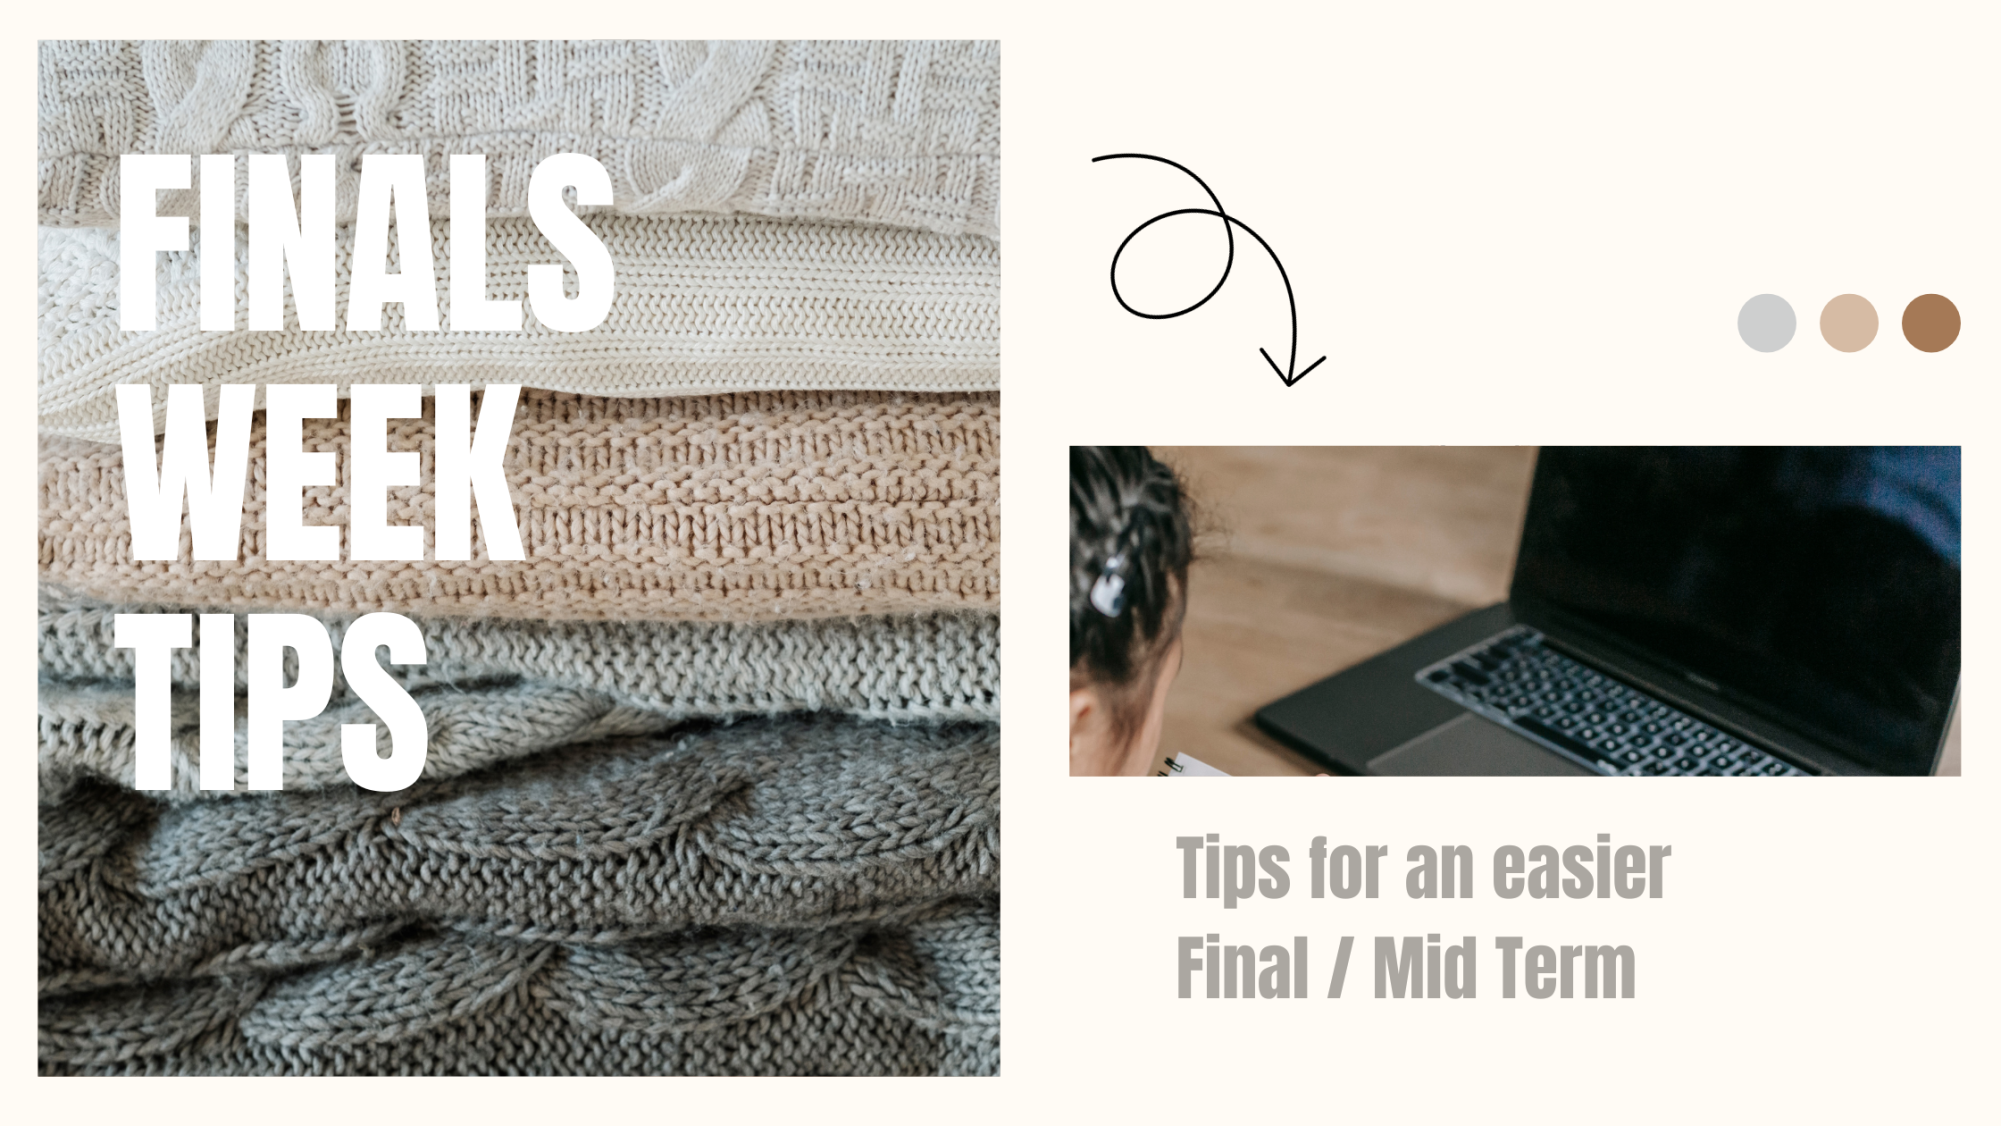 6 Ways to Help Make Studying for Finals Easier